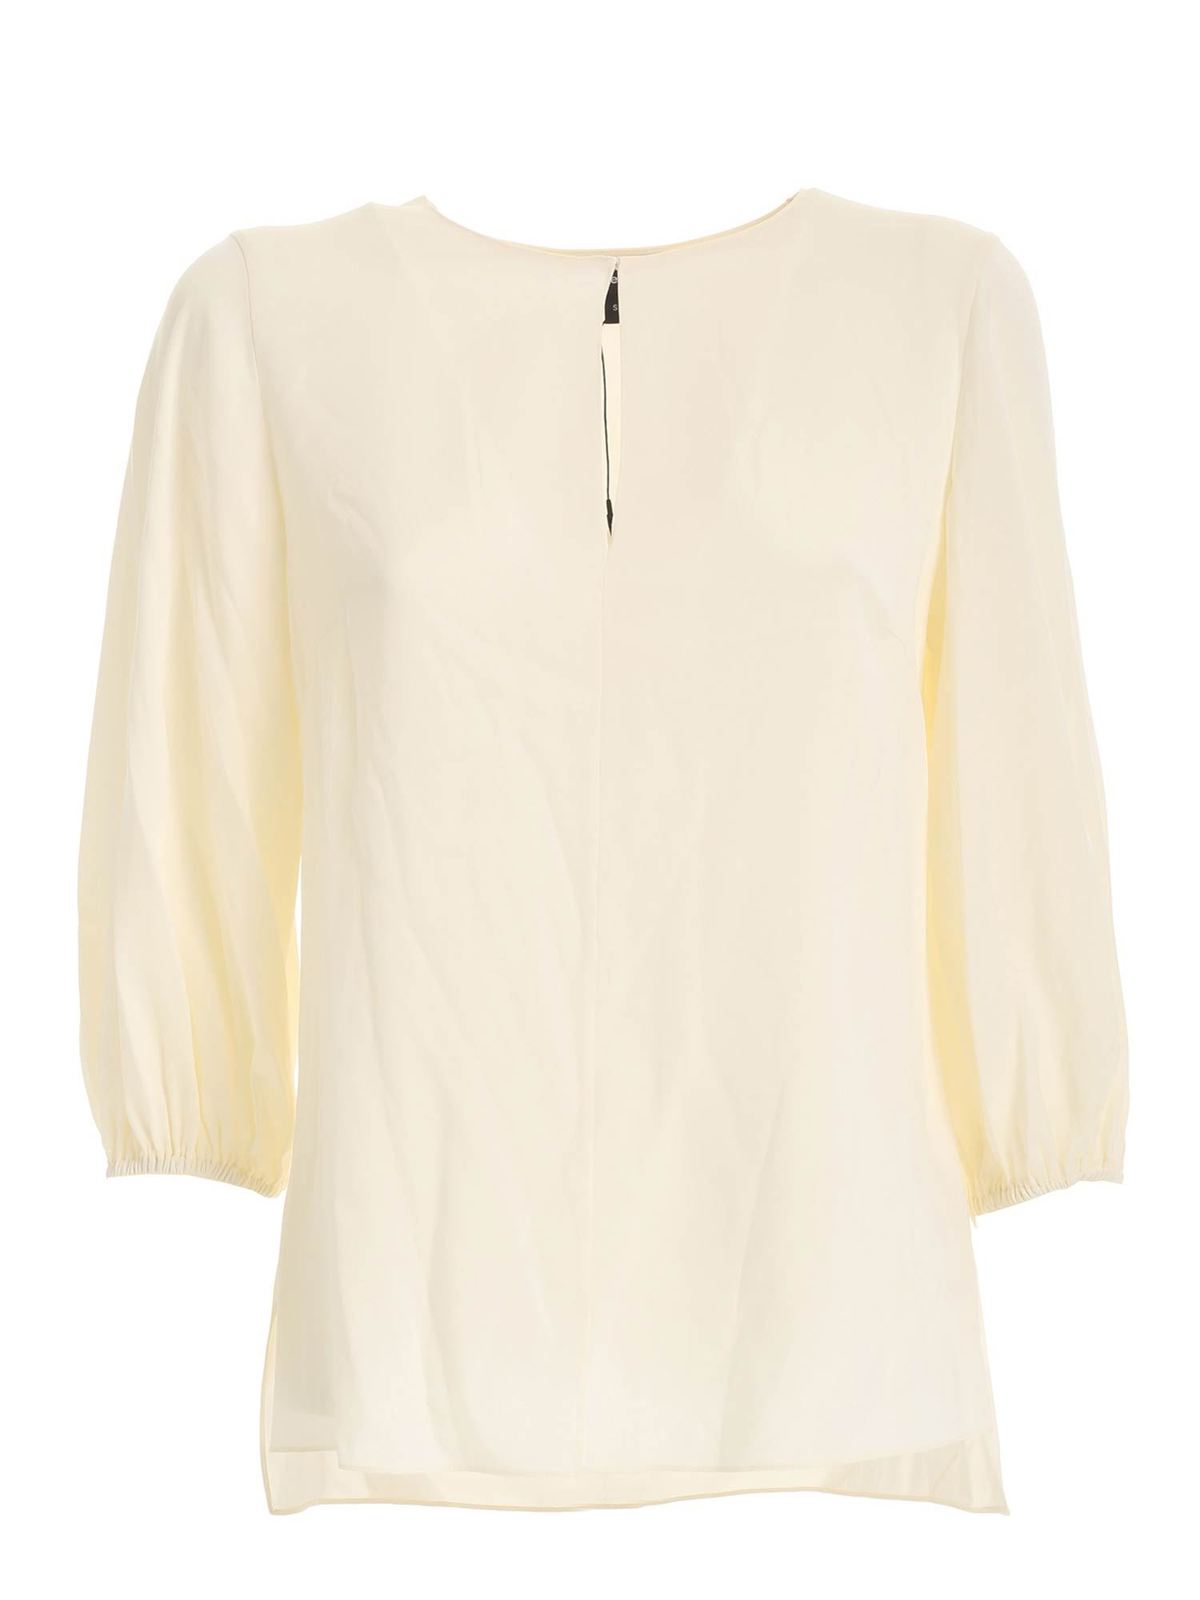 Blouses Theory - Volume blouse in cream color - K0602503IVORY | iKRIX.com